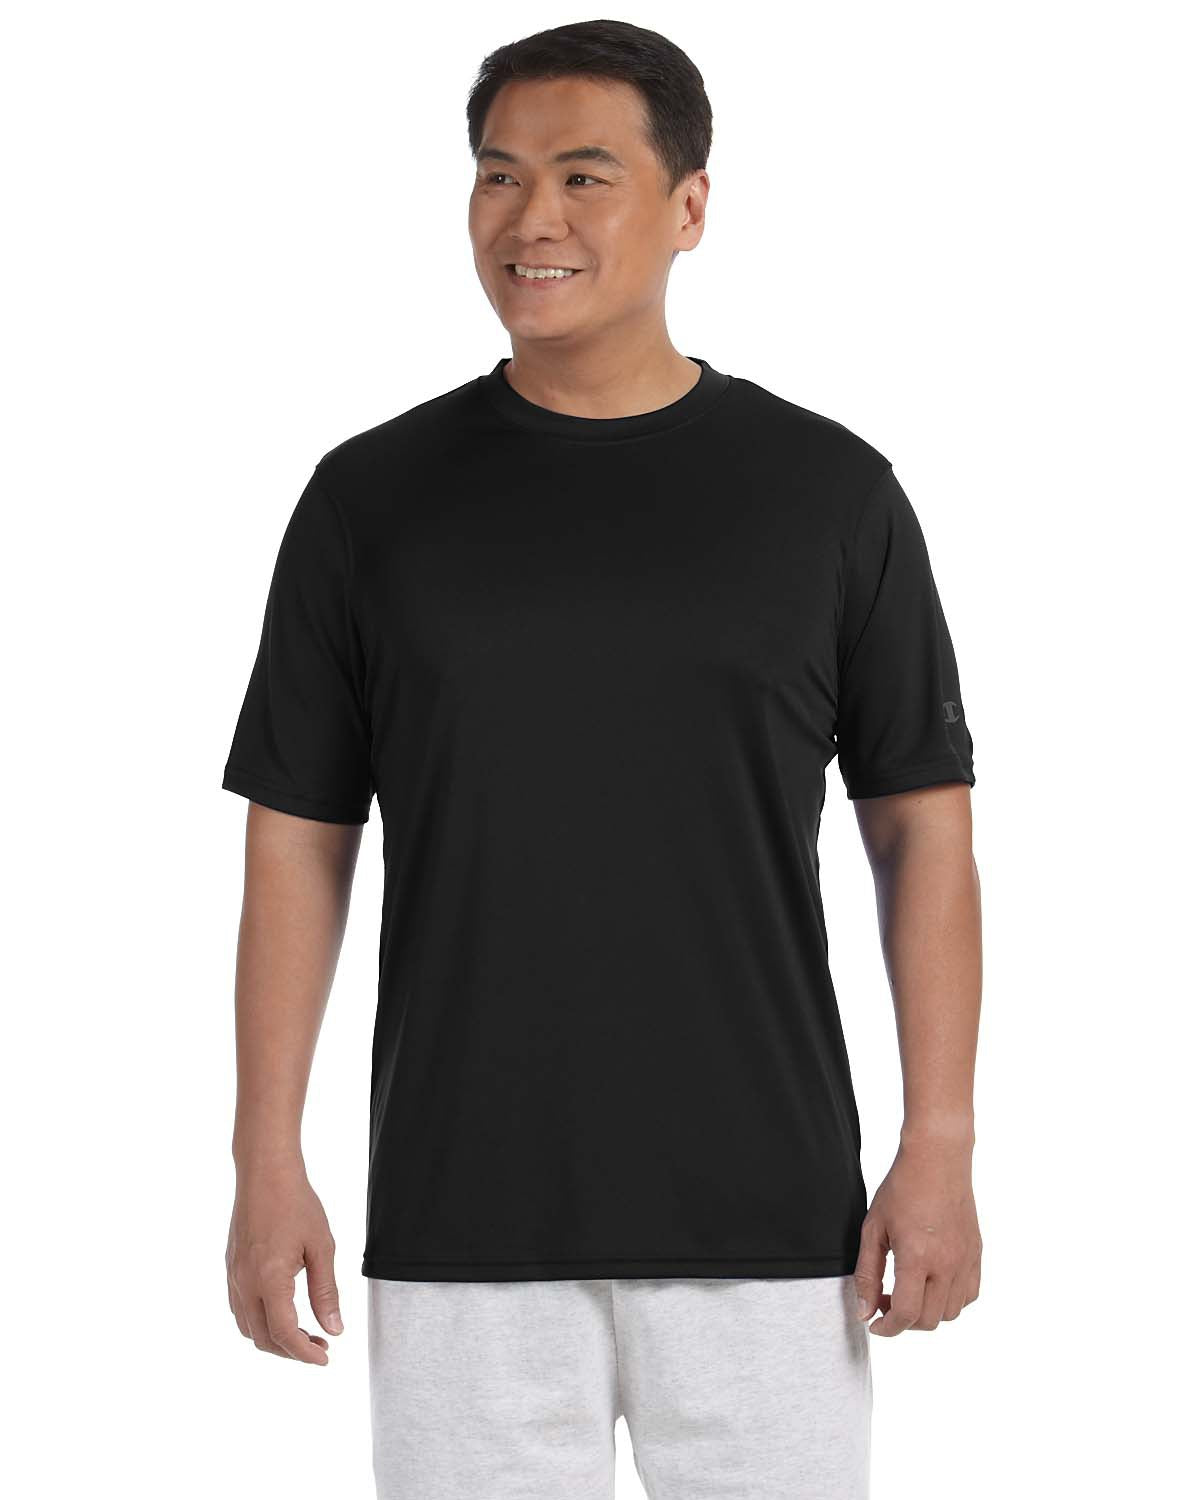 double dry t shirt